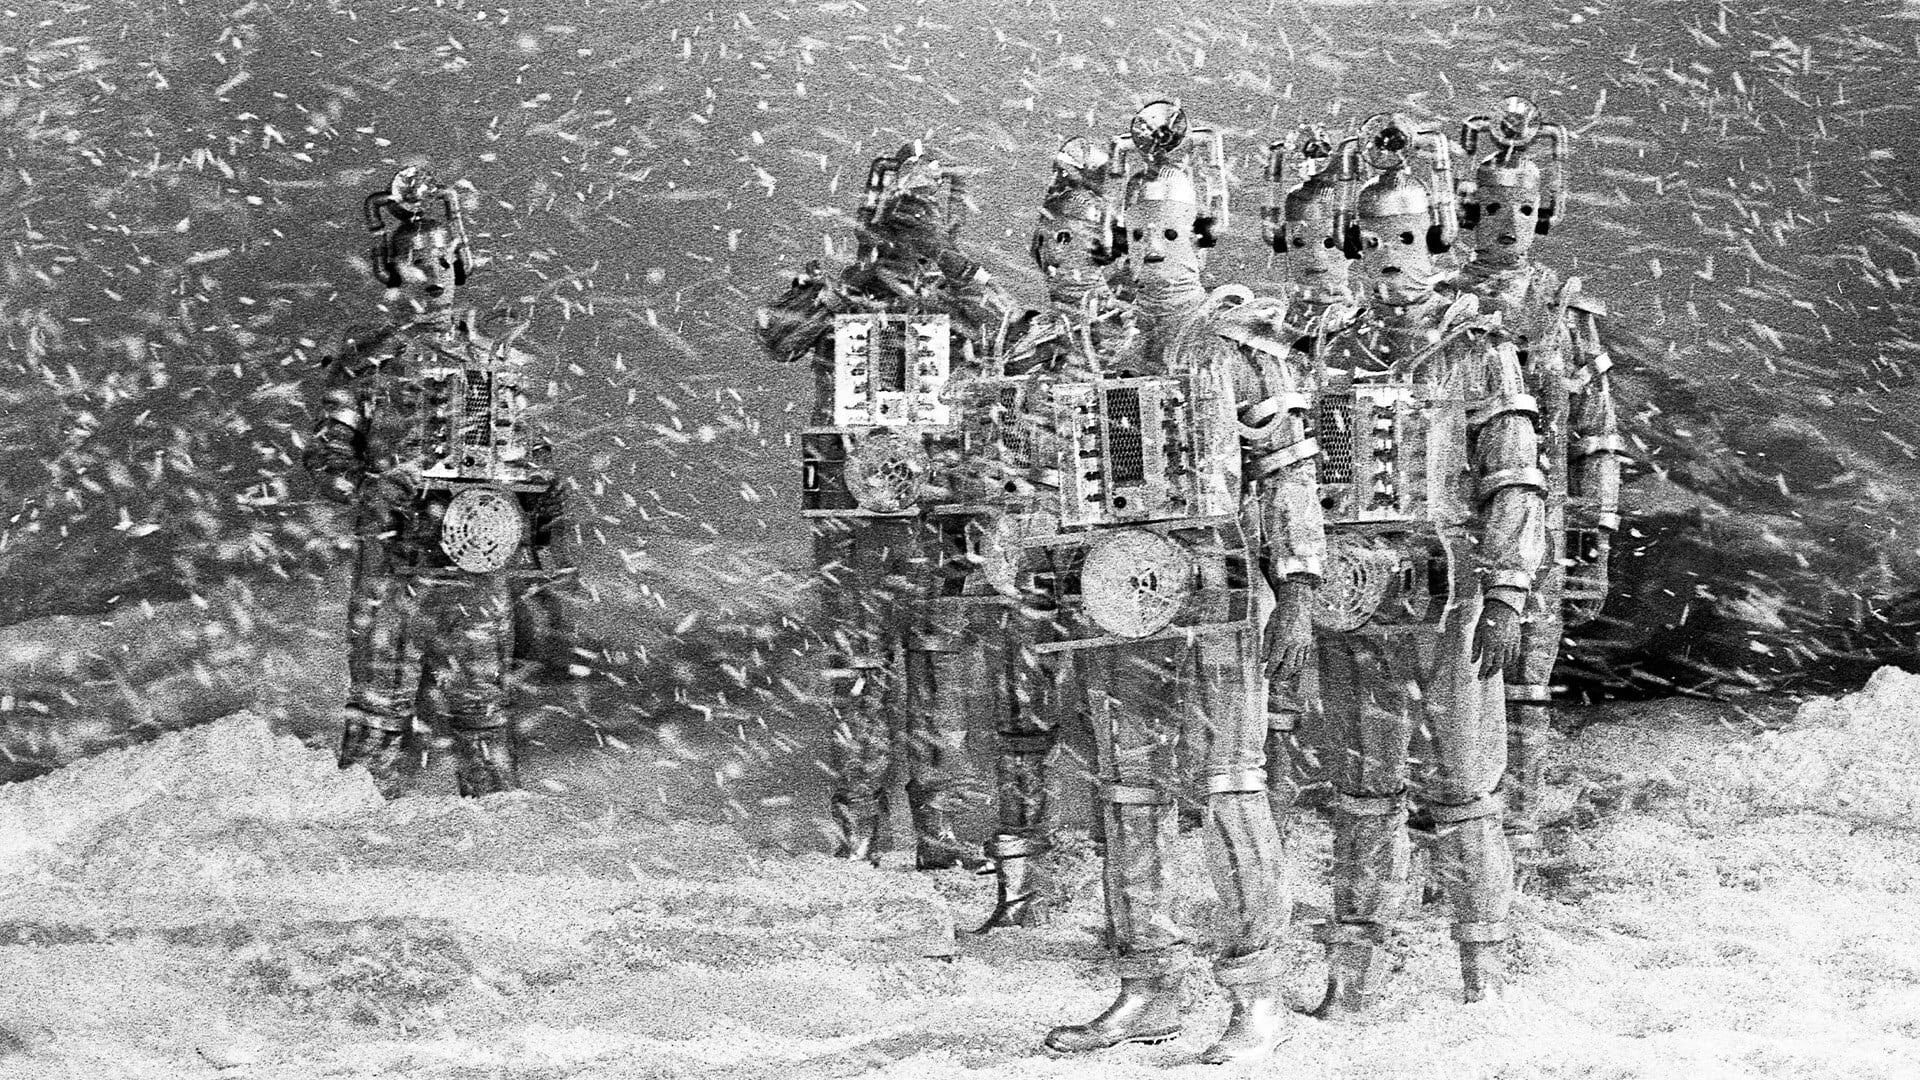 Doctor Who: The Tenth Planet (1966)